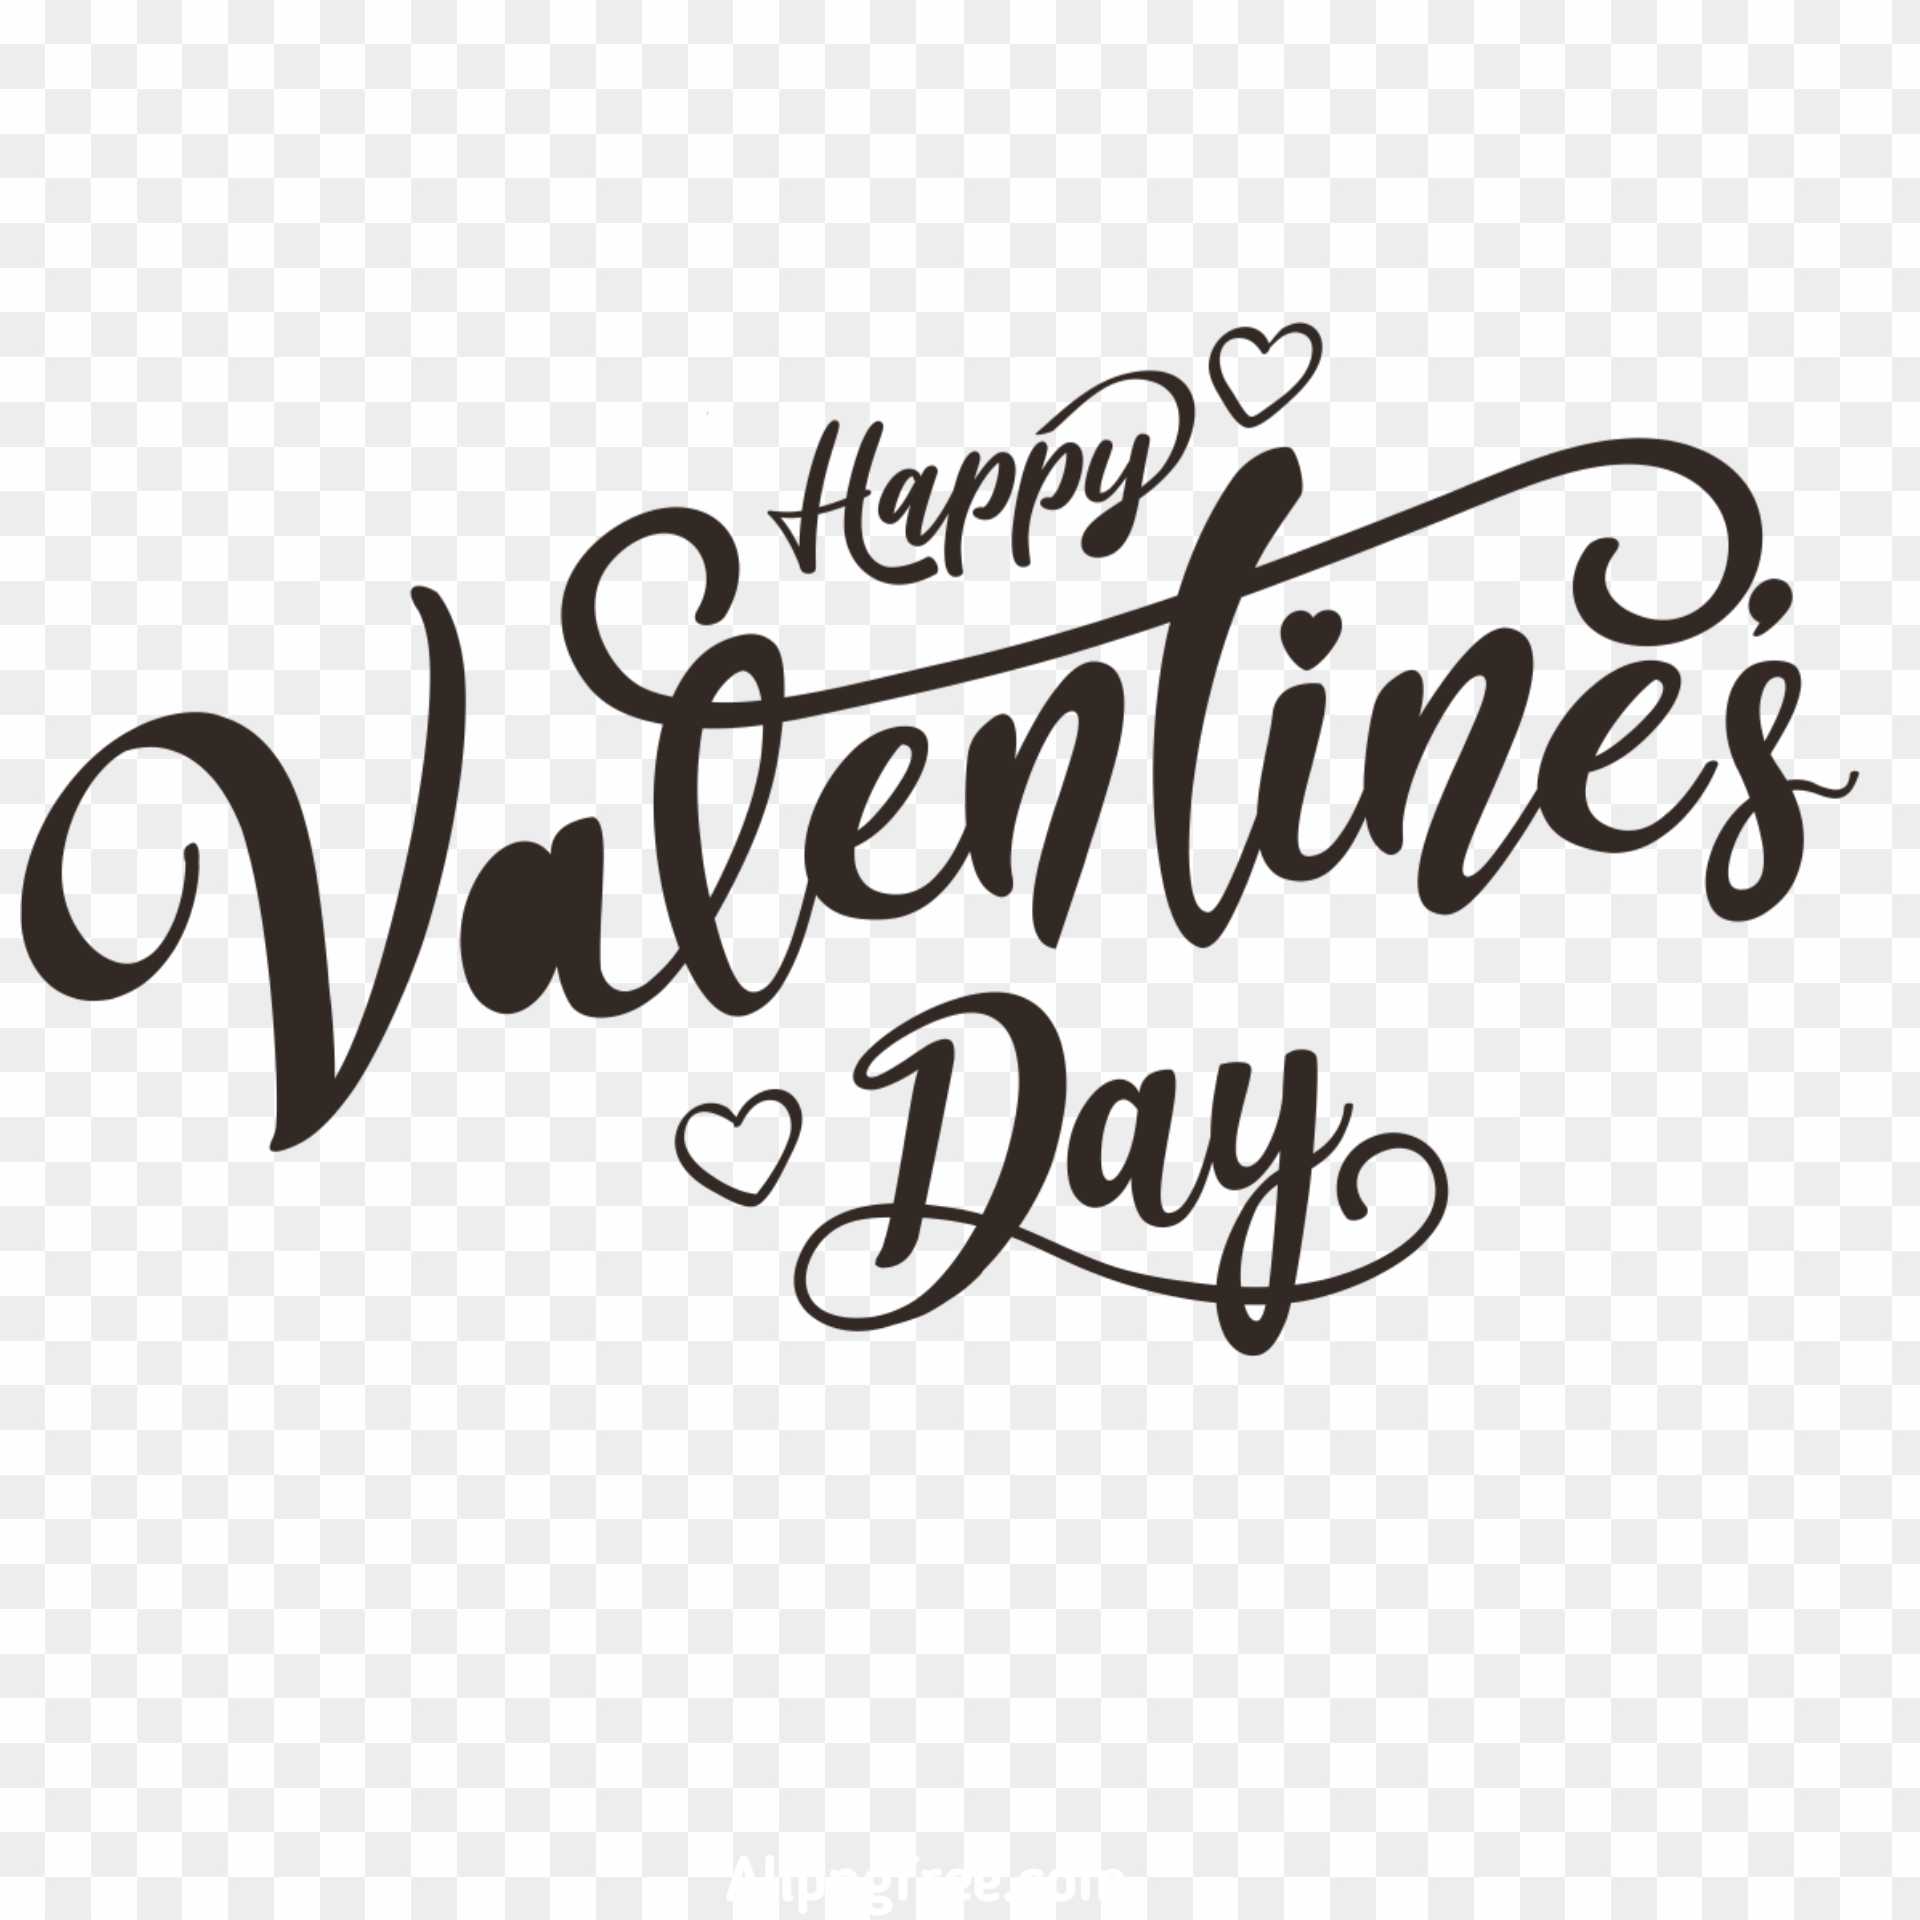 Happy valentine Day text PNG images